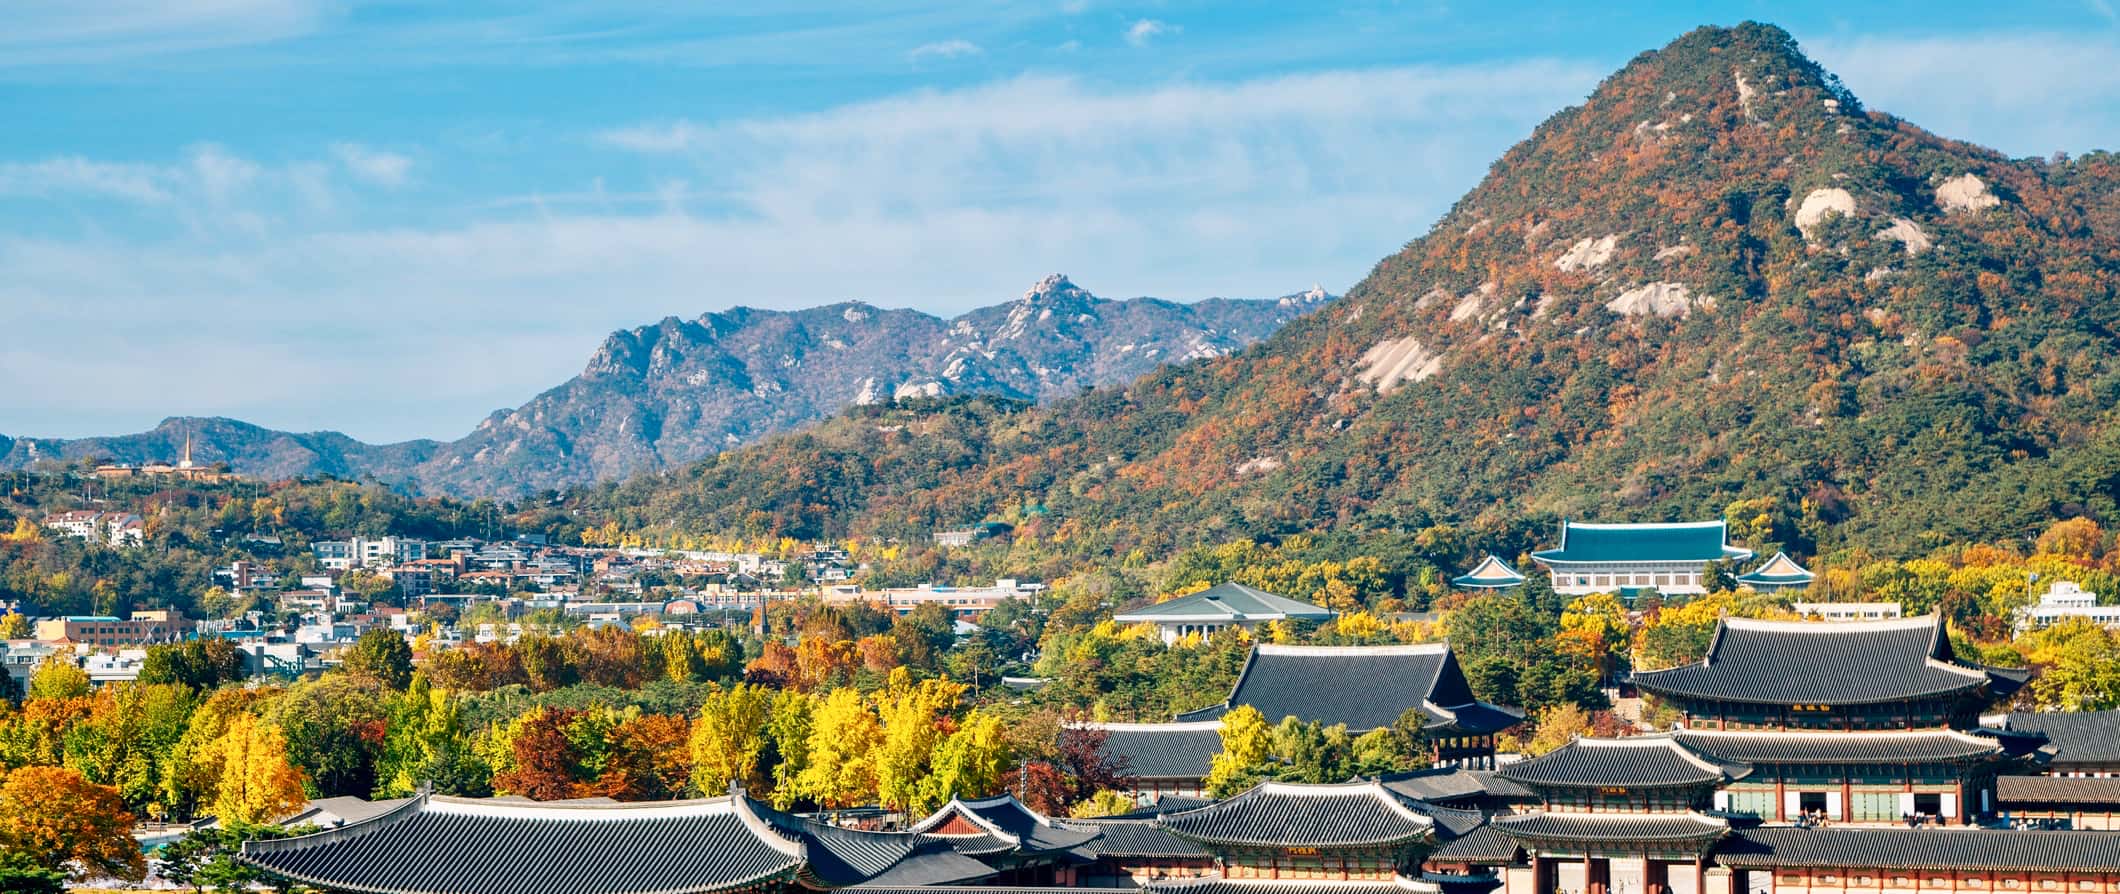 The rugged mountains and greenery of South Korea